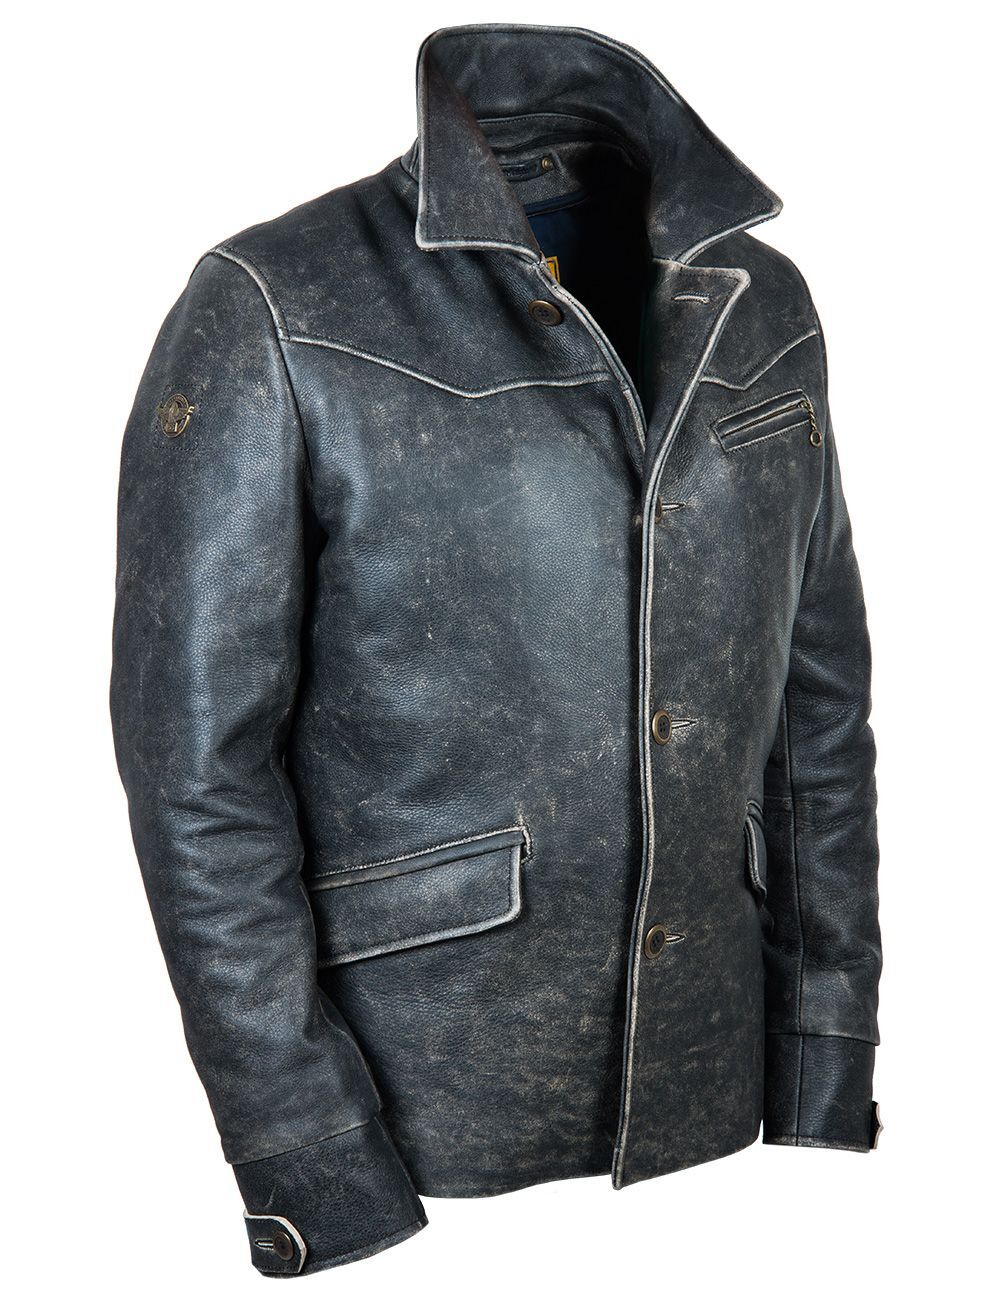 FALCON KNIGHT VINTAGE LEATHER JACKET ON BUTTONS